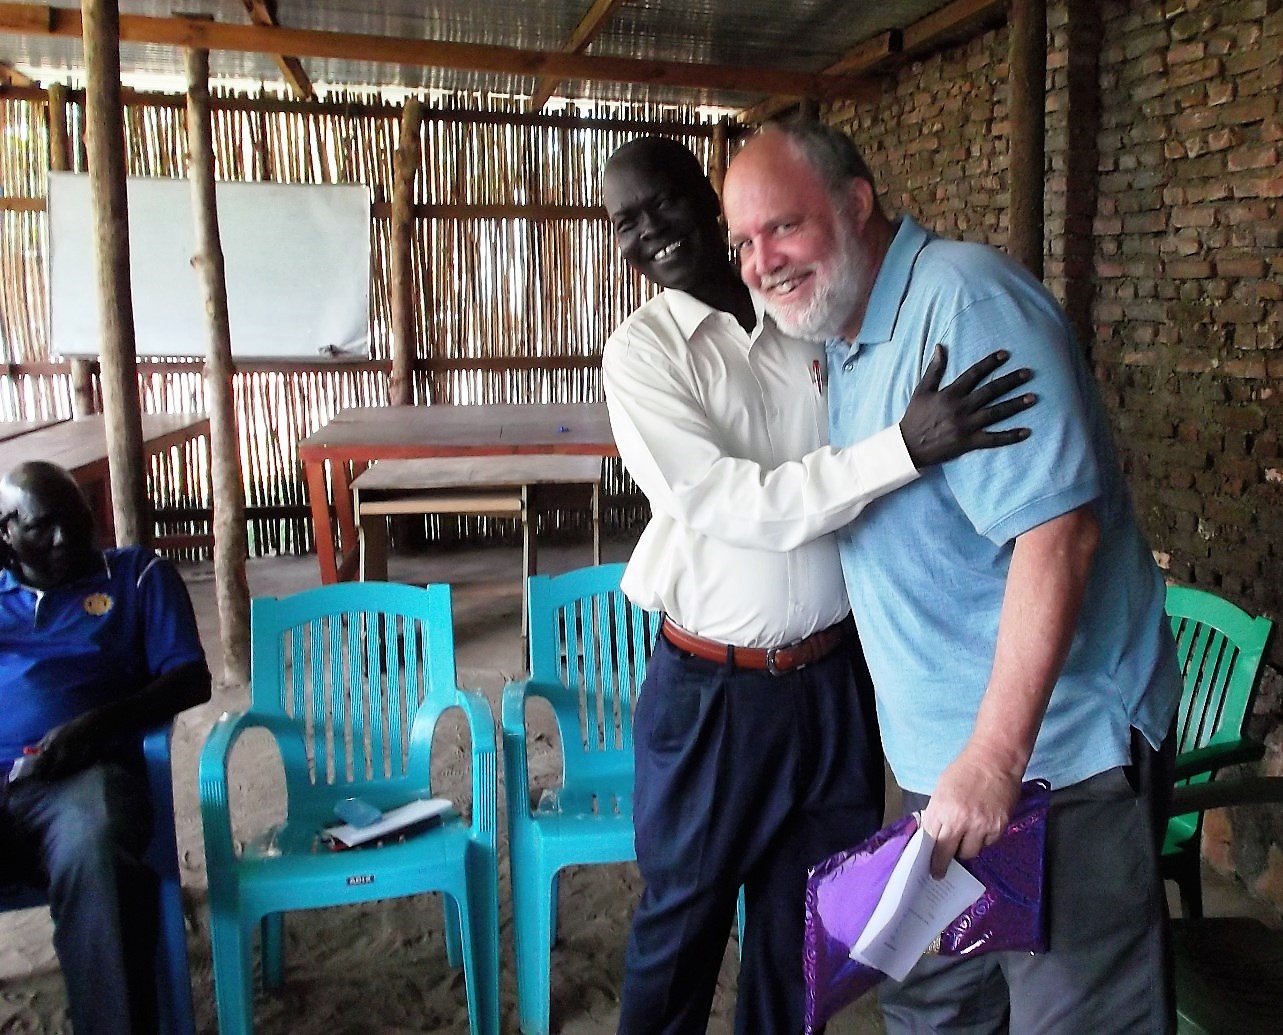 Rev. Santino, Principal at NTC, embraces Paul, our friend who came to teach an intensive course, during his farewell party.